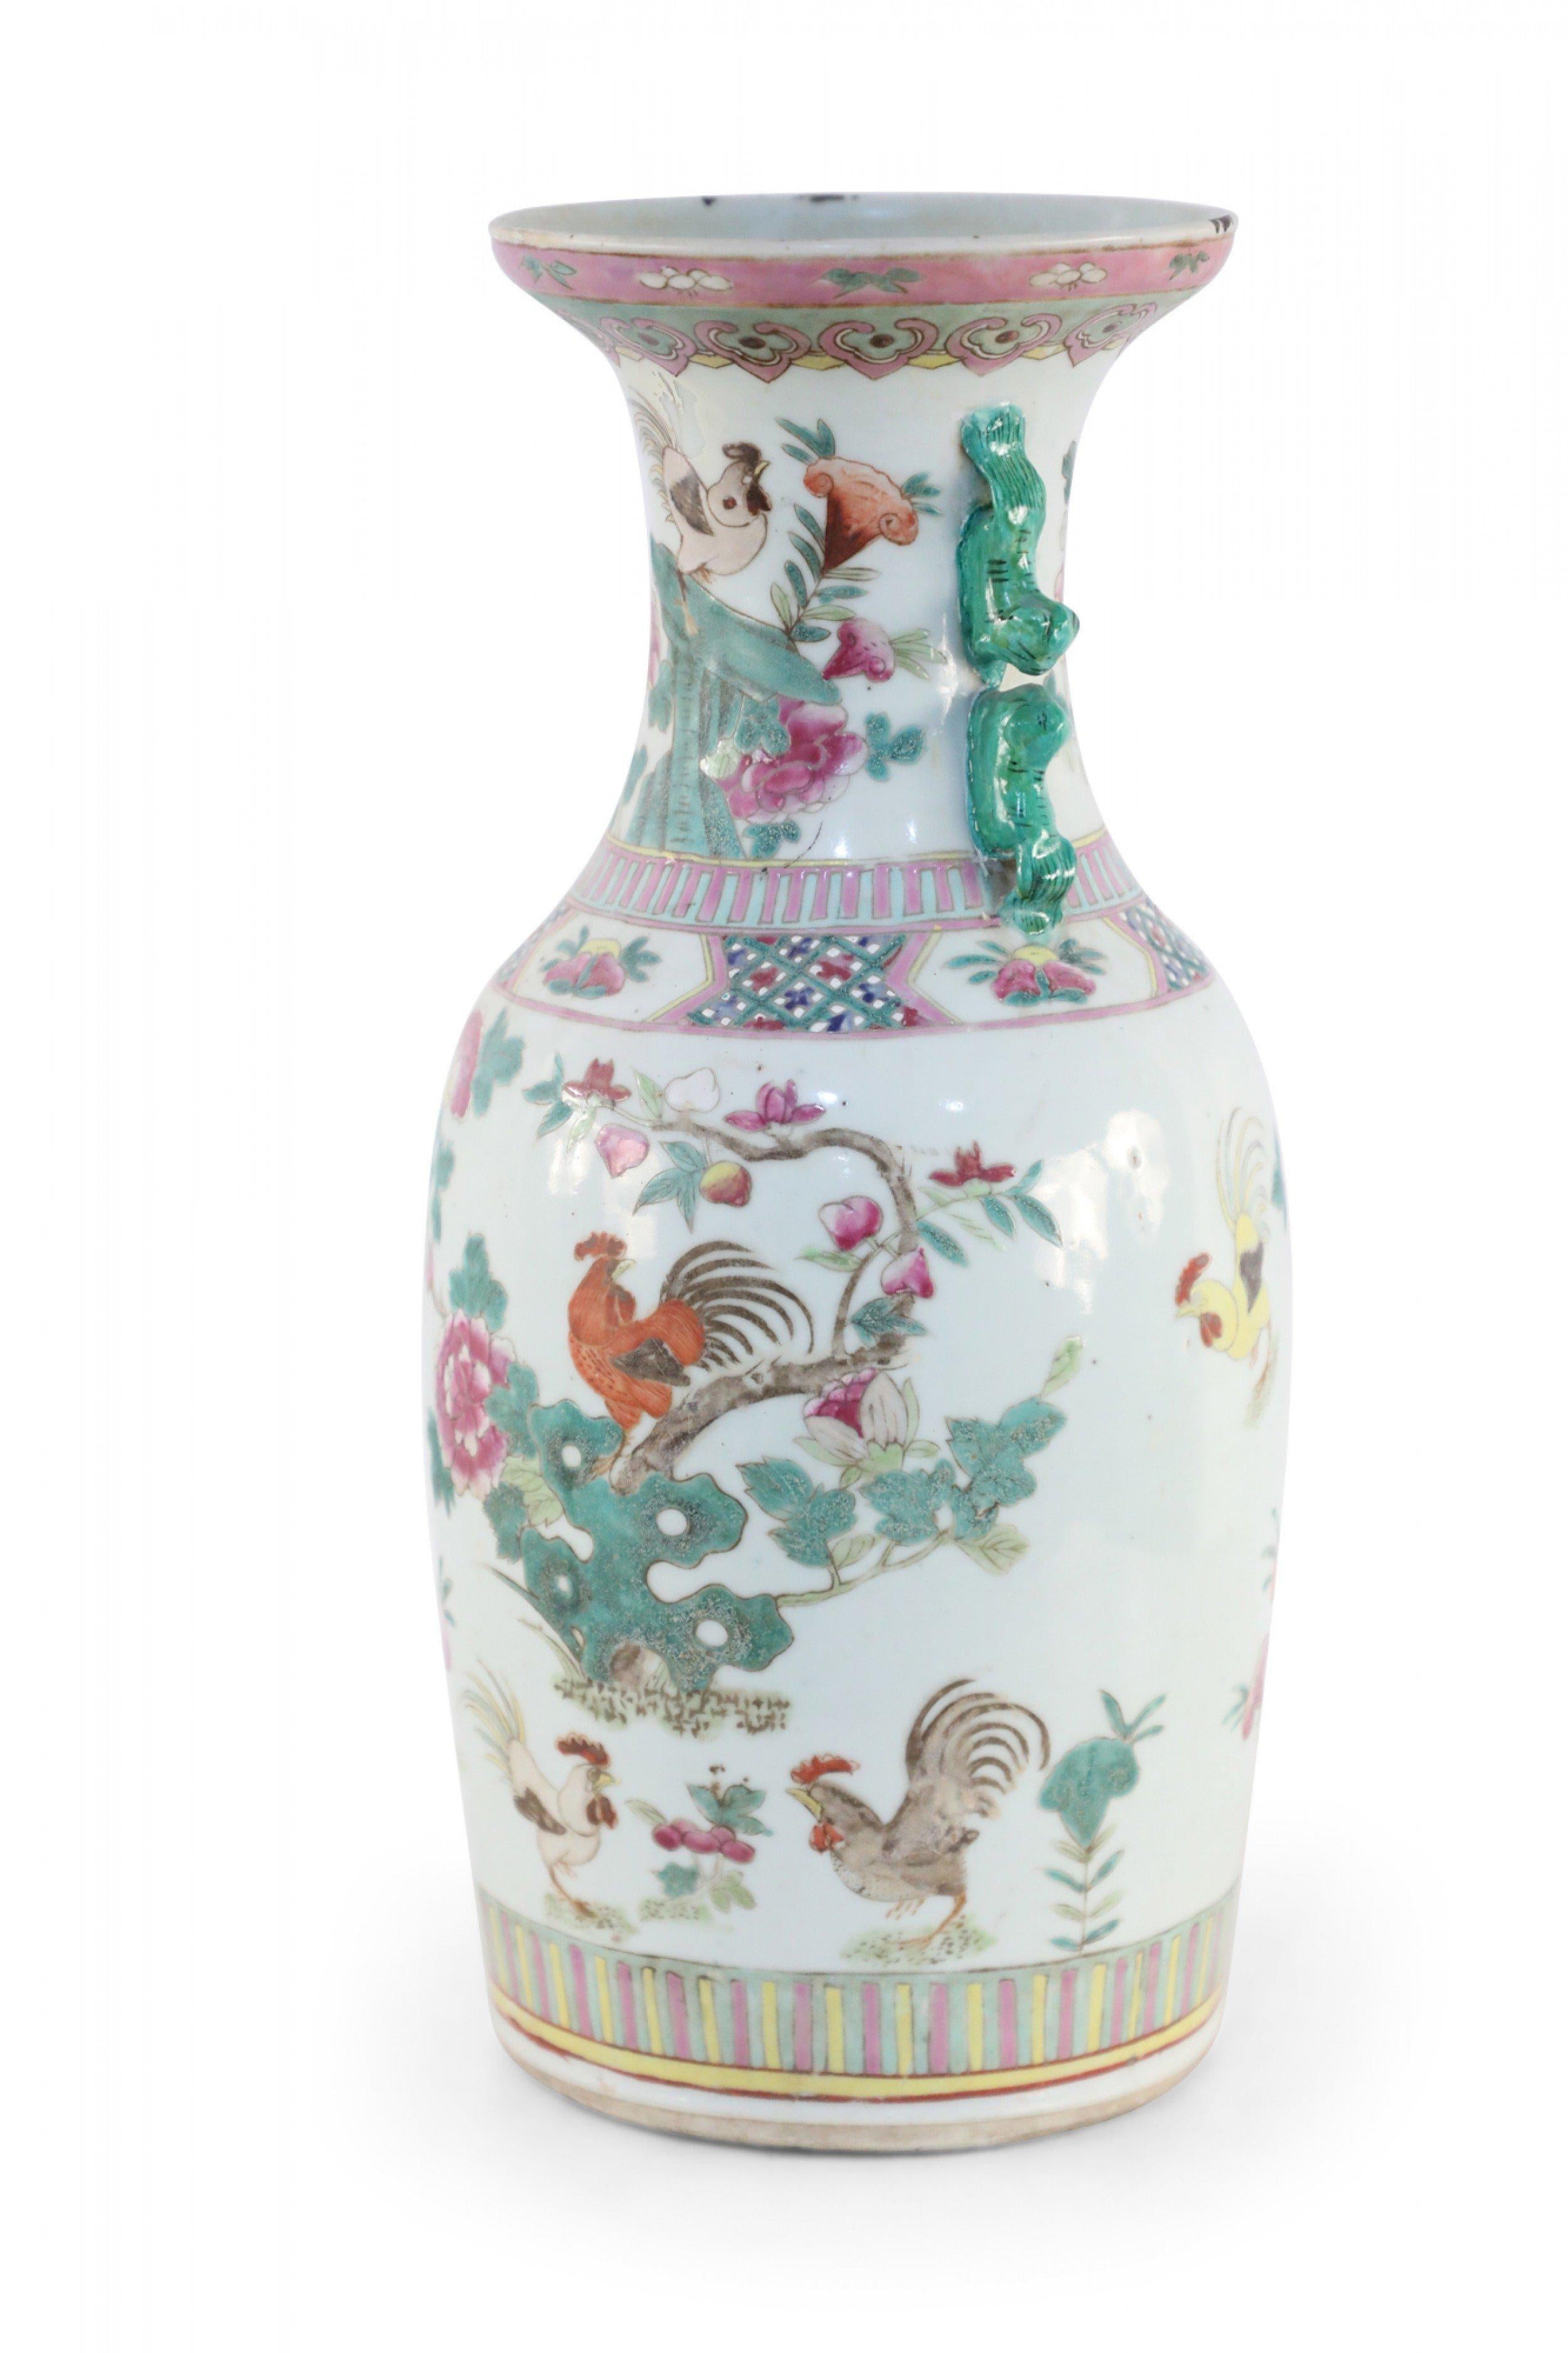 Chinese White, Green, and Pink Floral and Rooster Design Porcelain Urn For Sale 3